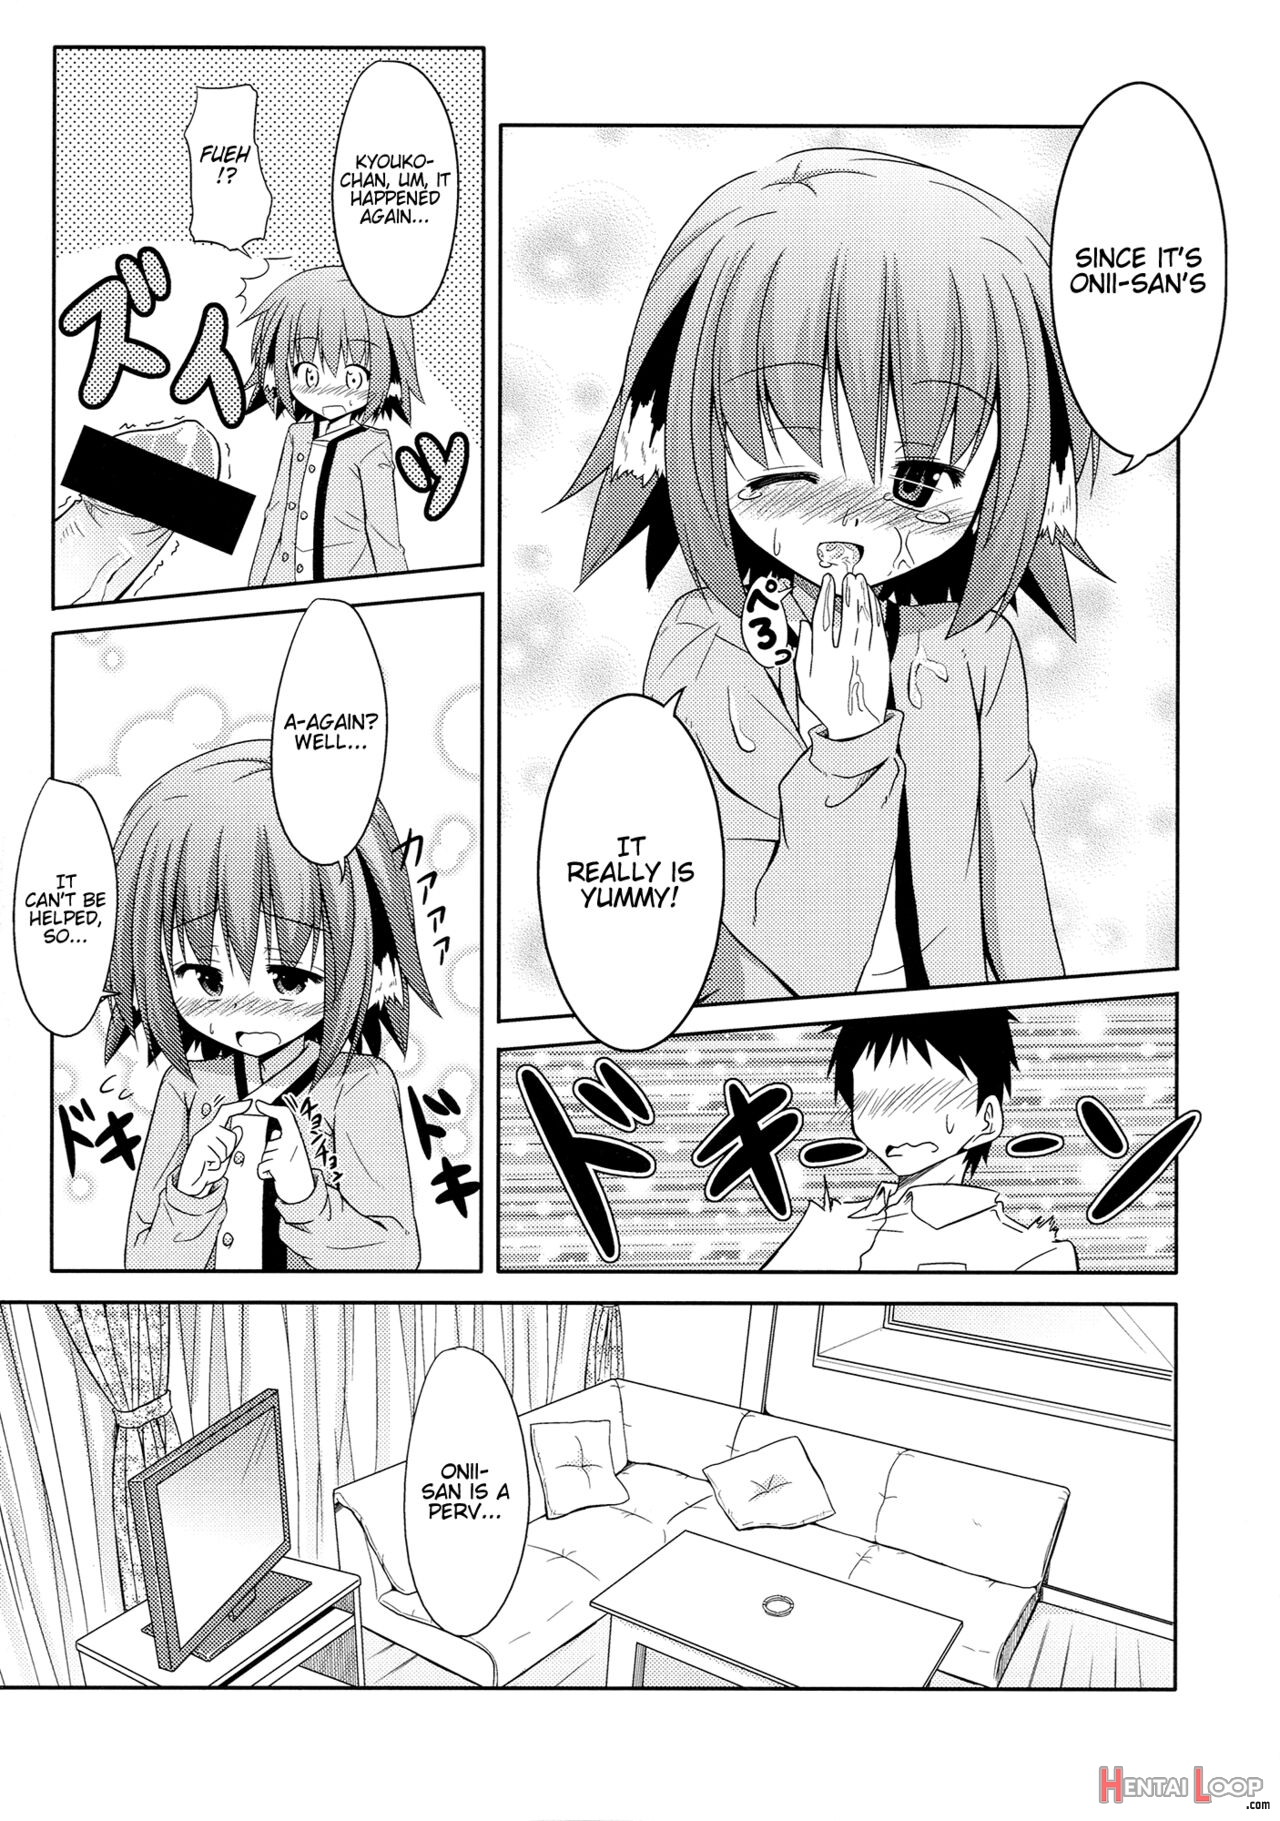 Kyouko's Daily Life page 12